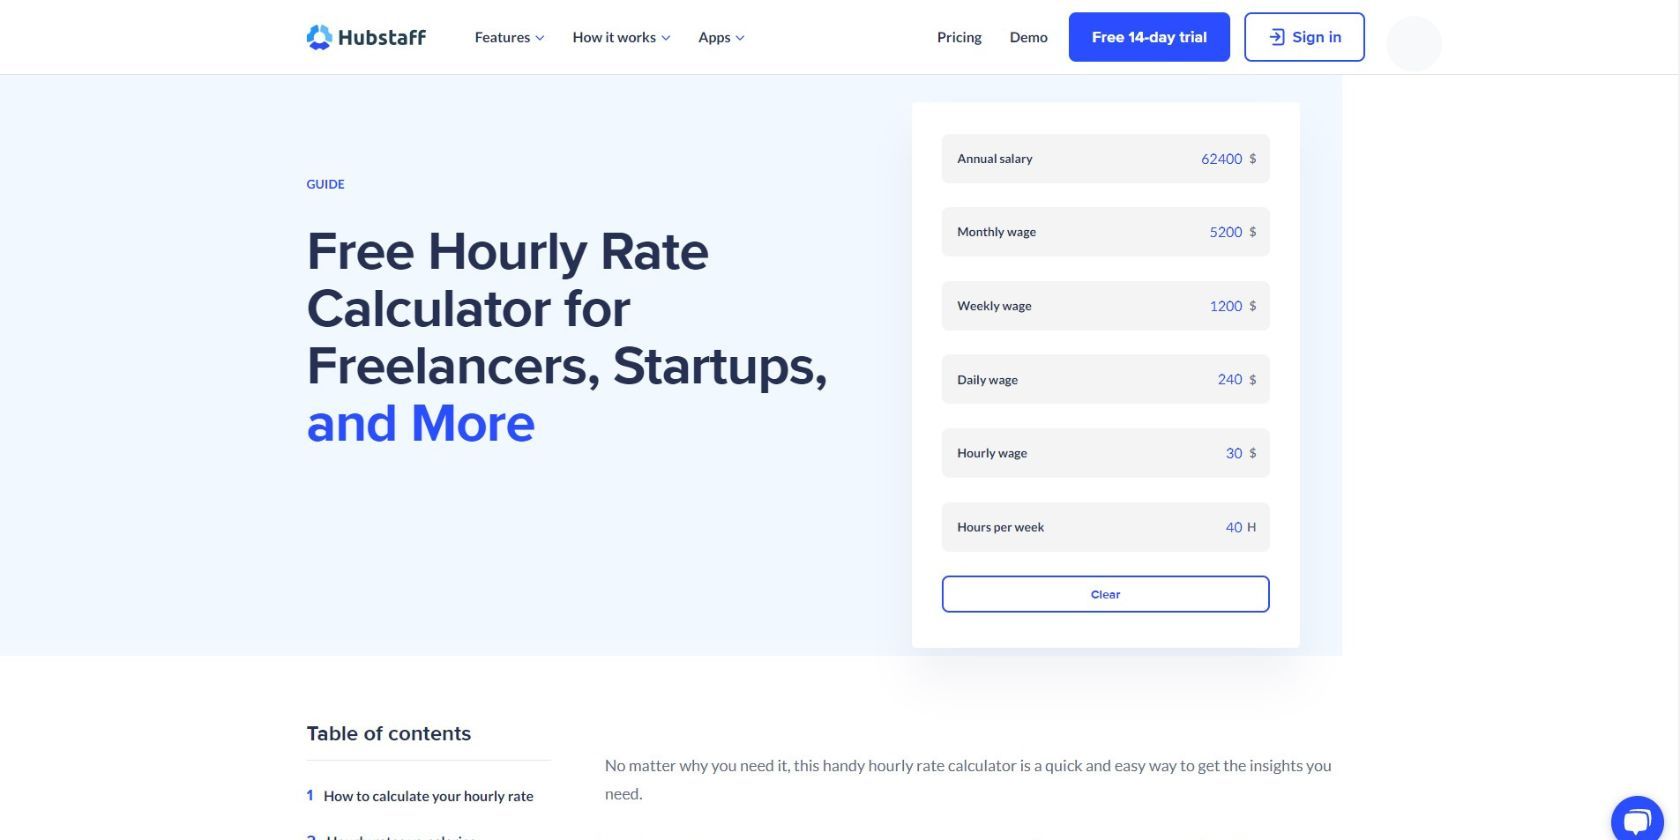 Hubstaff free hourly rate calculator for freelancers 